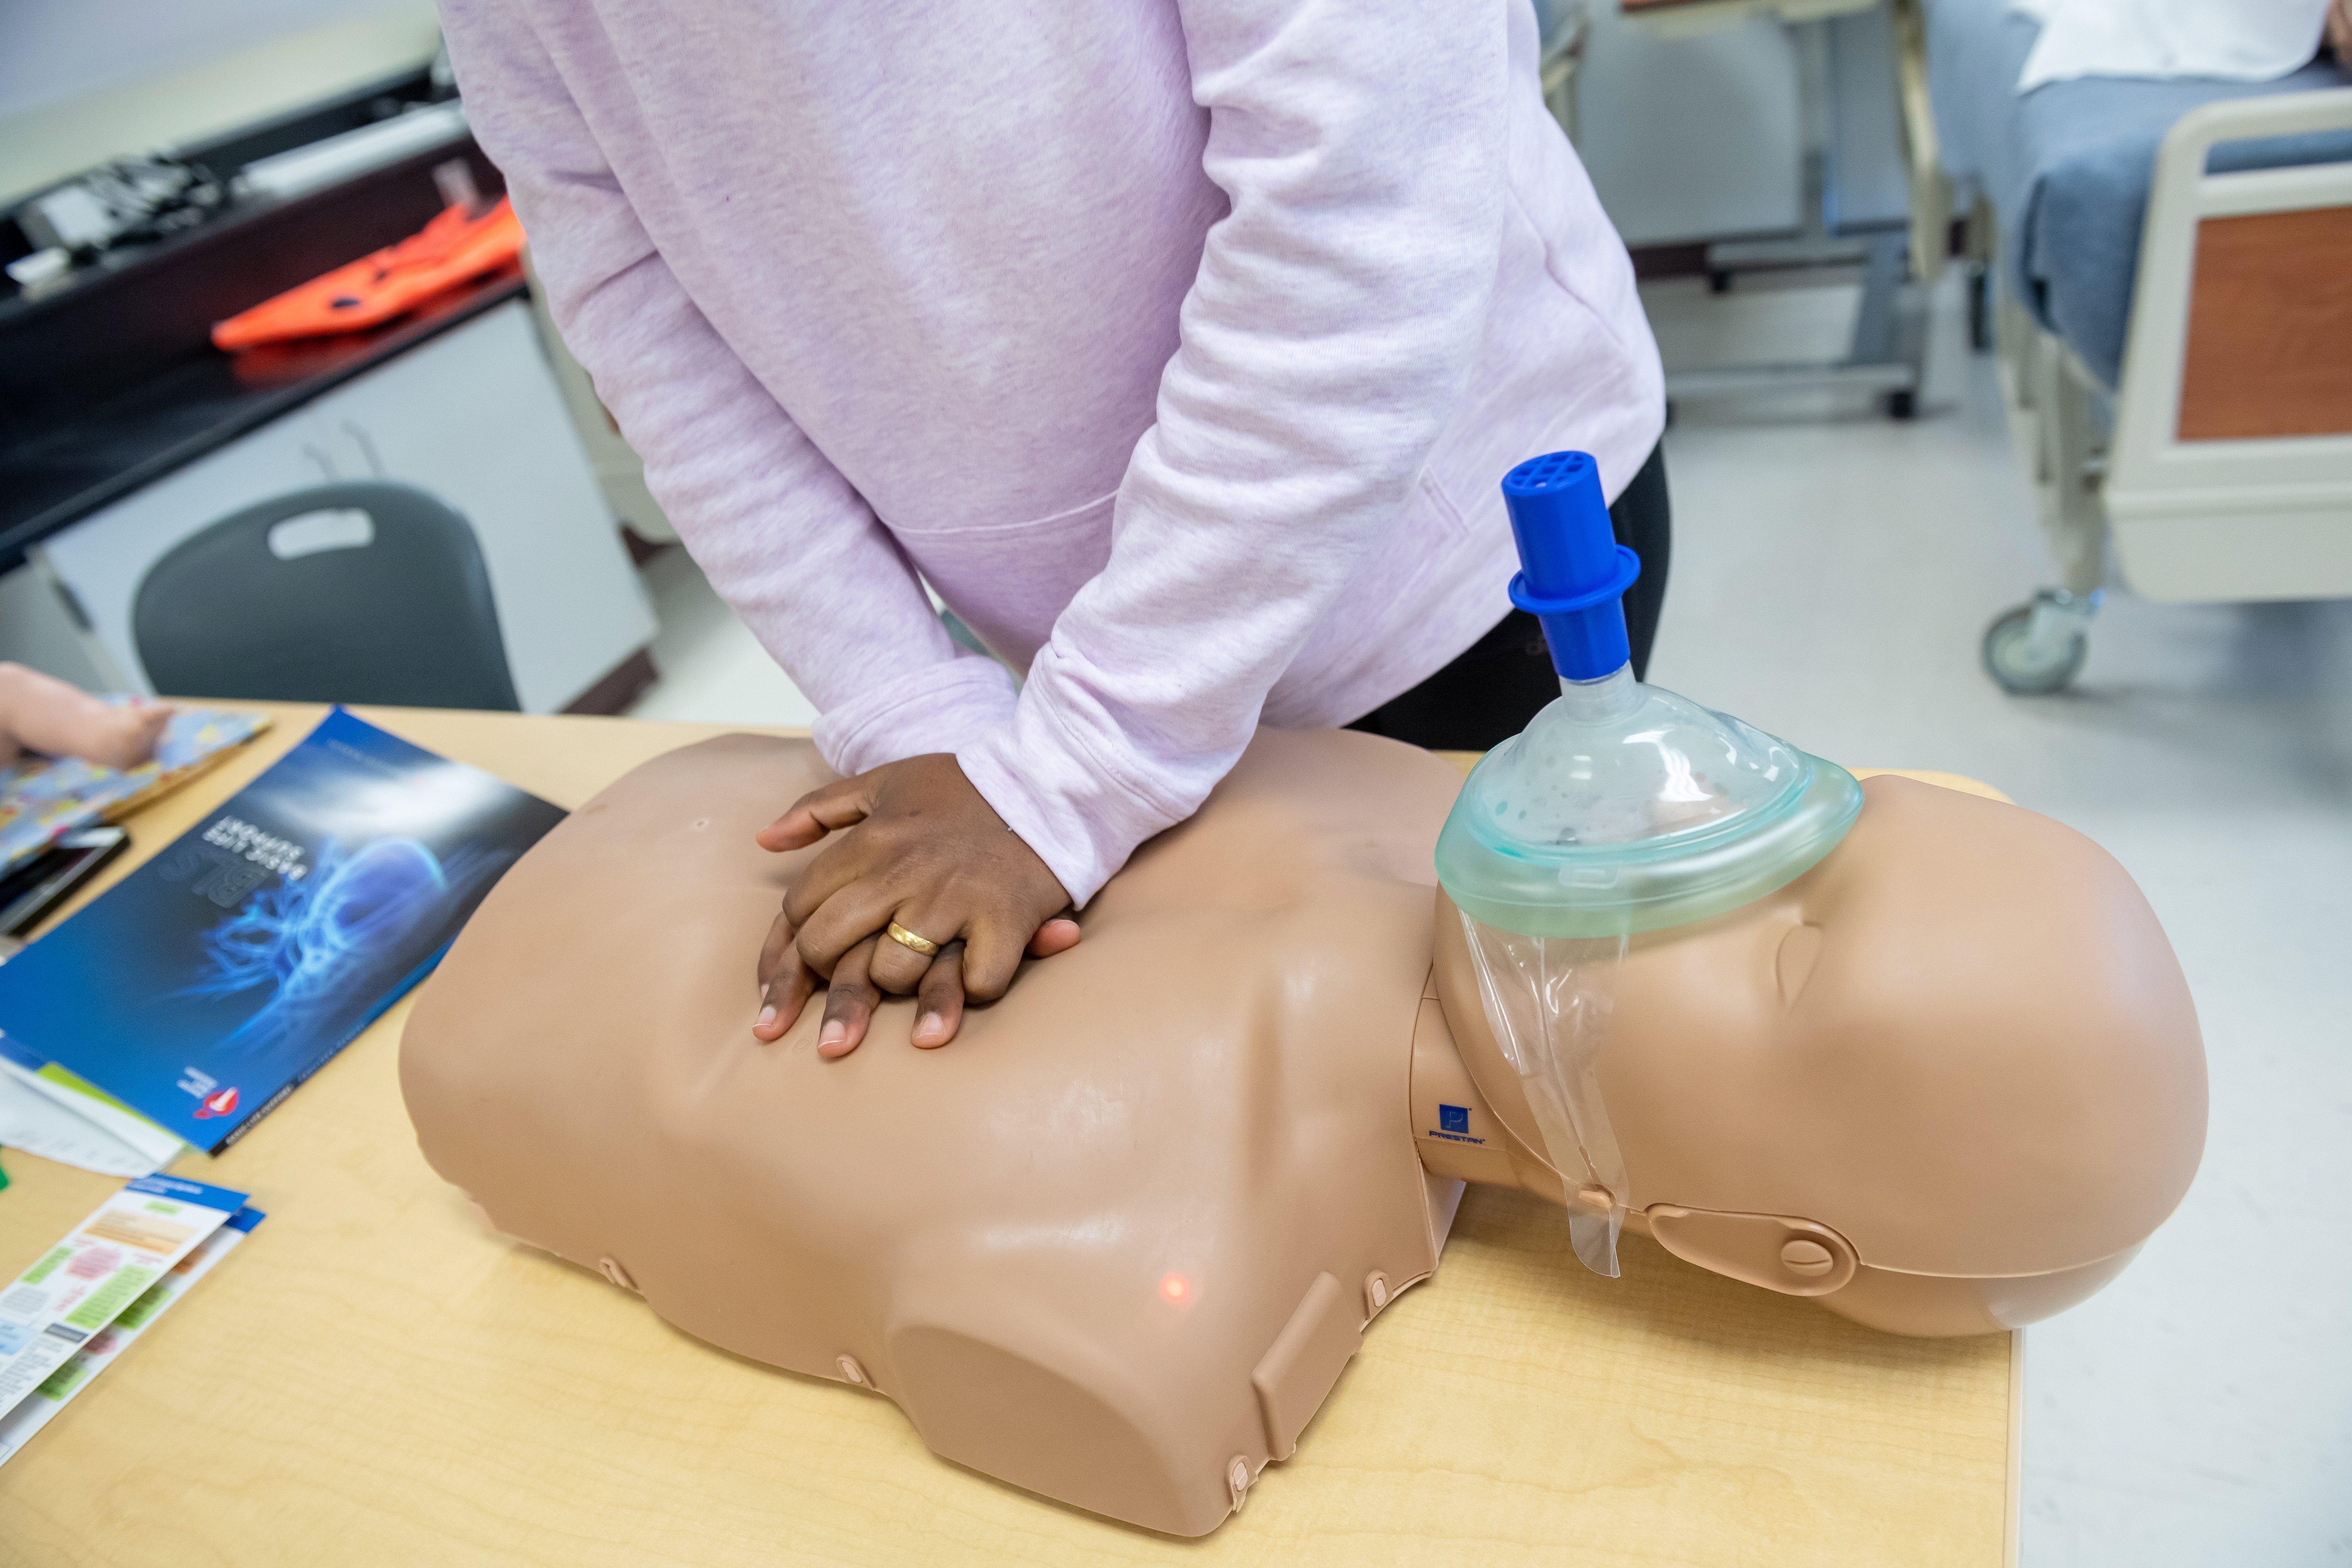 An FCPS instructor demonstrates how to conduct CPR on a mannequin.